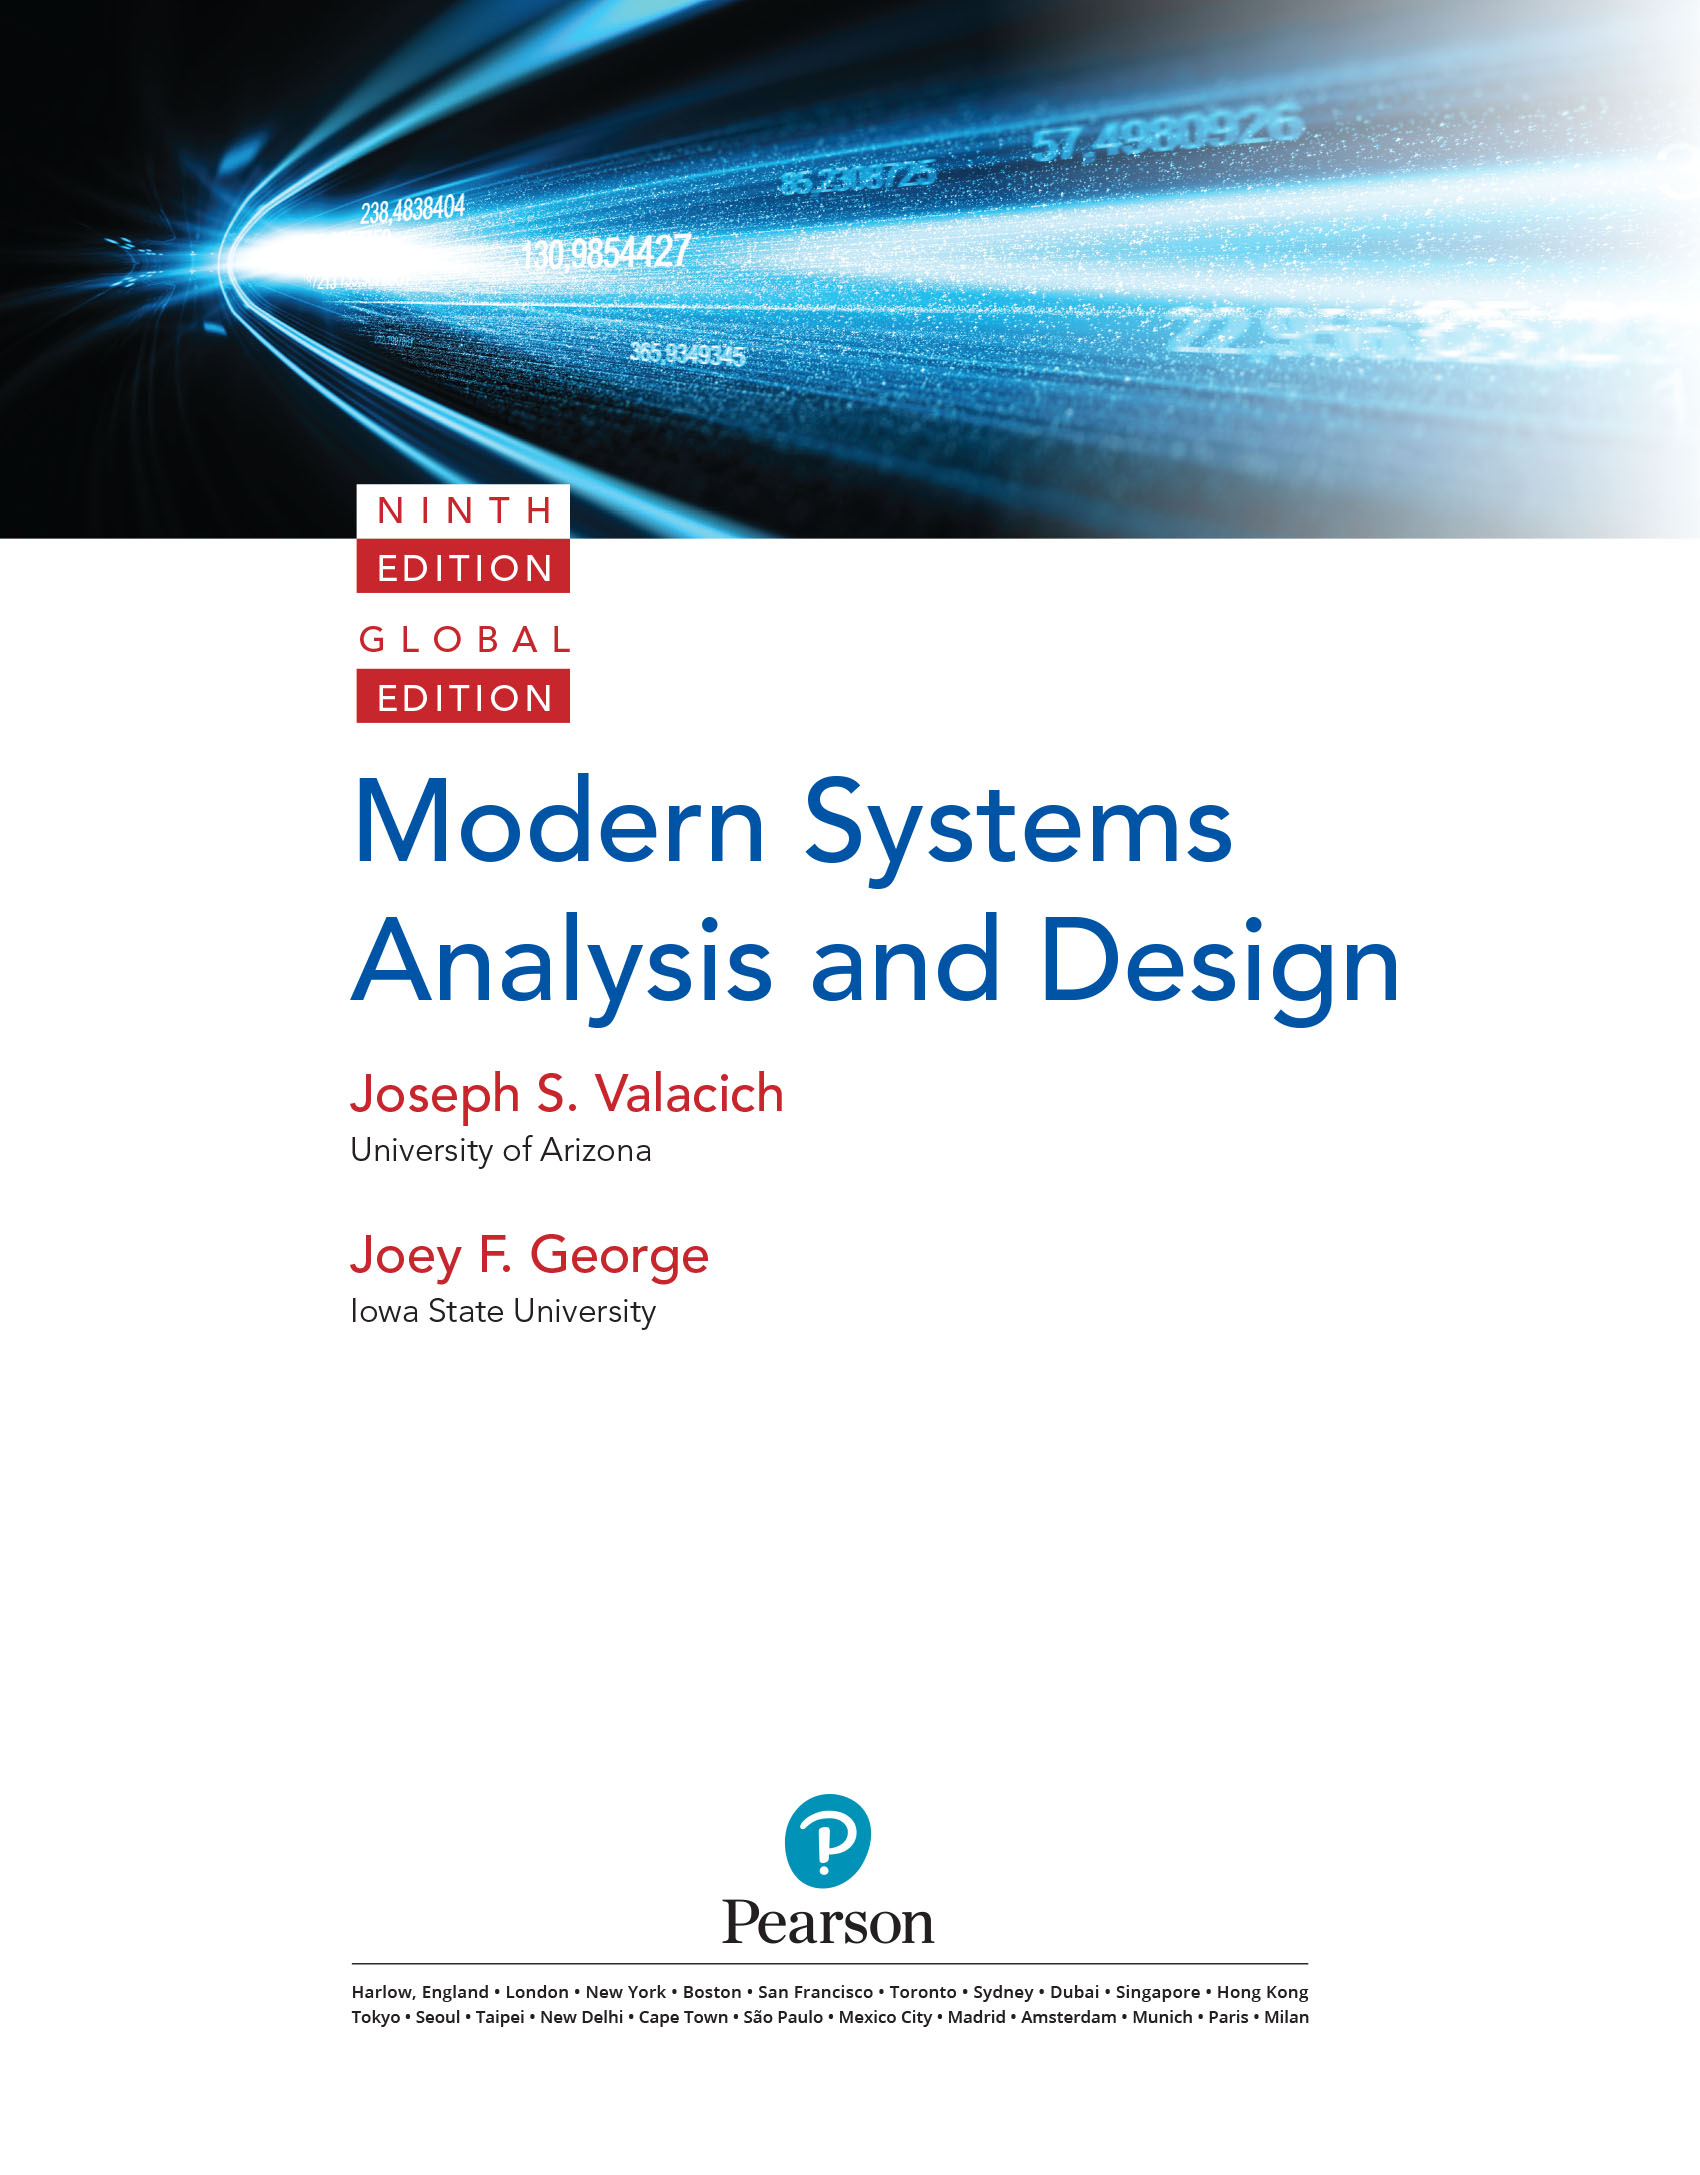 Modern Systems Analysis and Design, Global Edition, 9th Edition